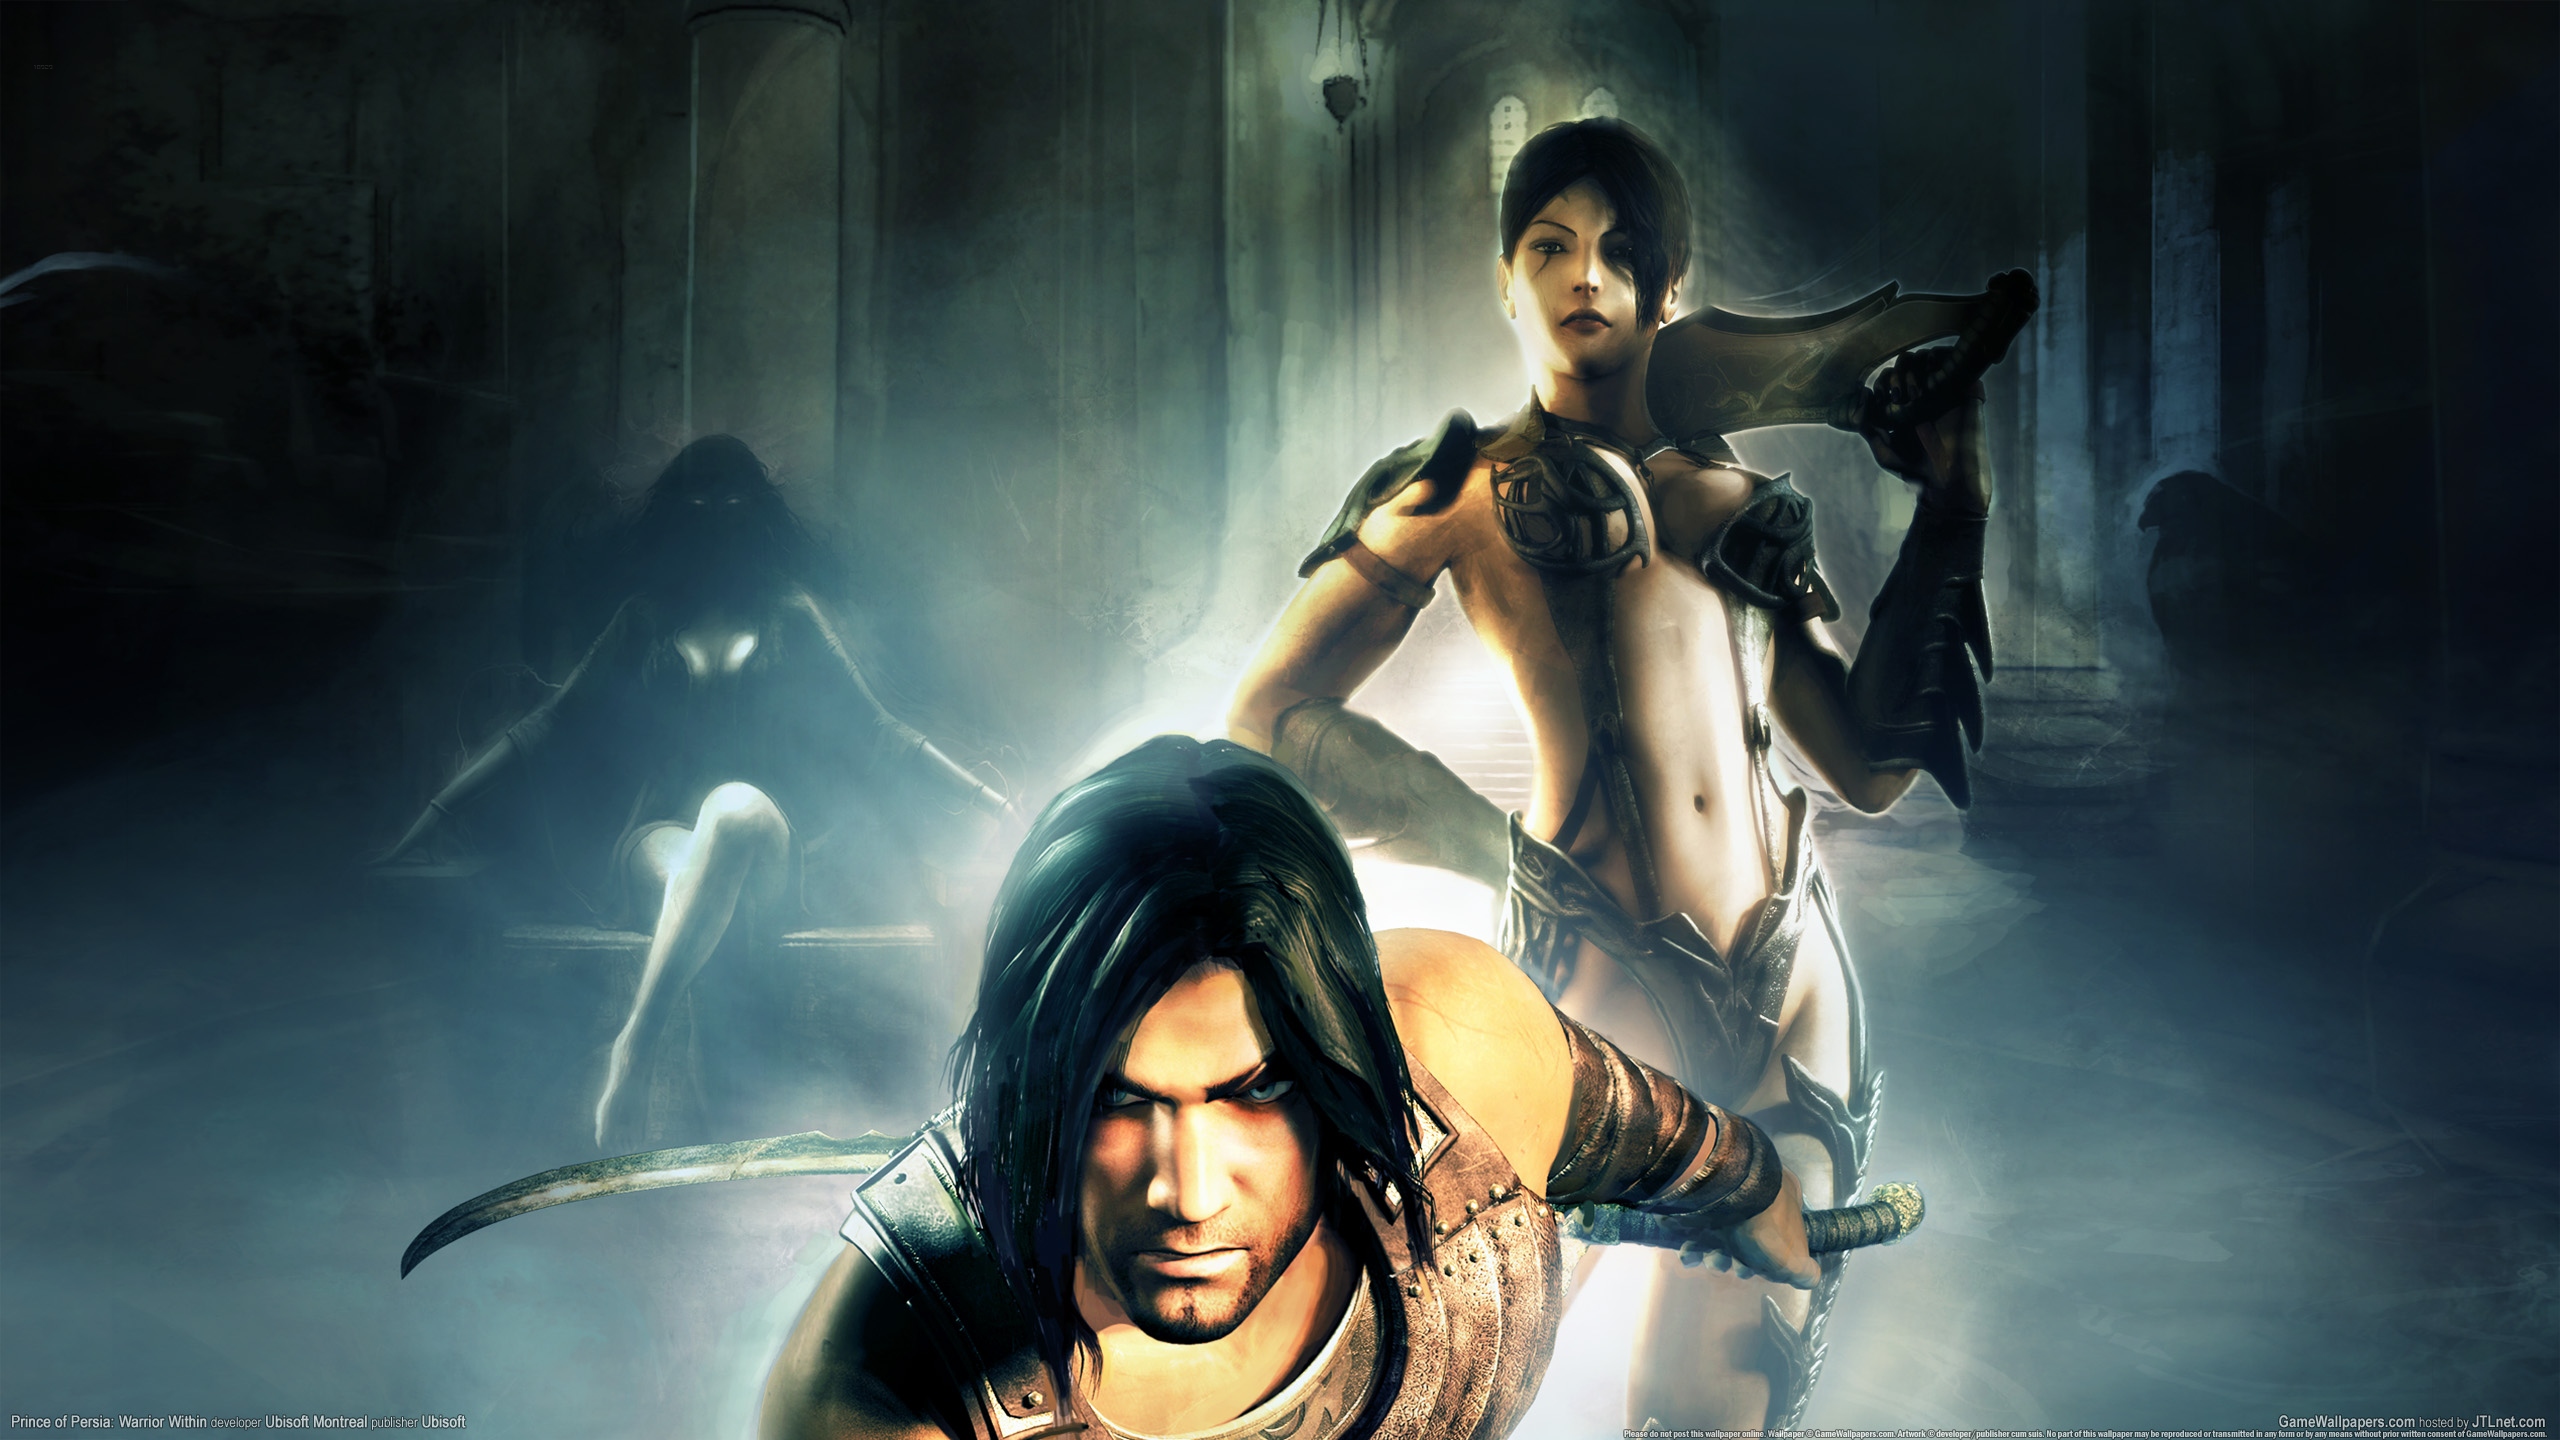 Prince of Persia: Warrior Within 2560x1440 wallpaper or background 19